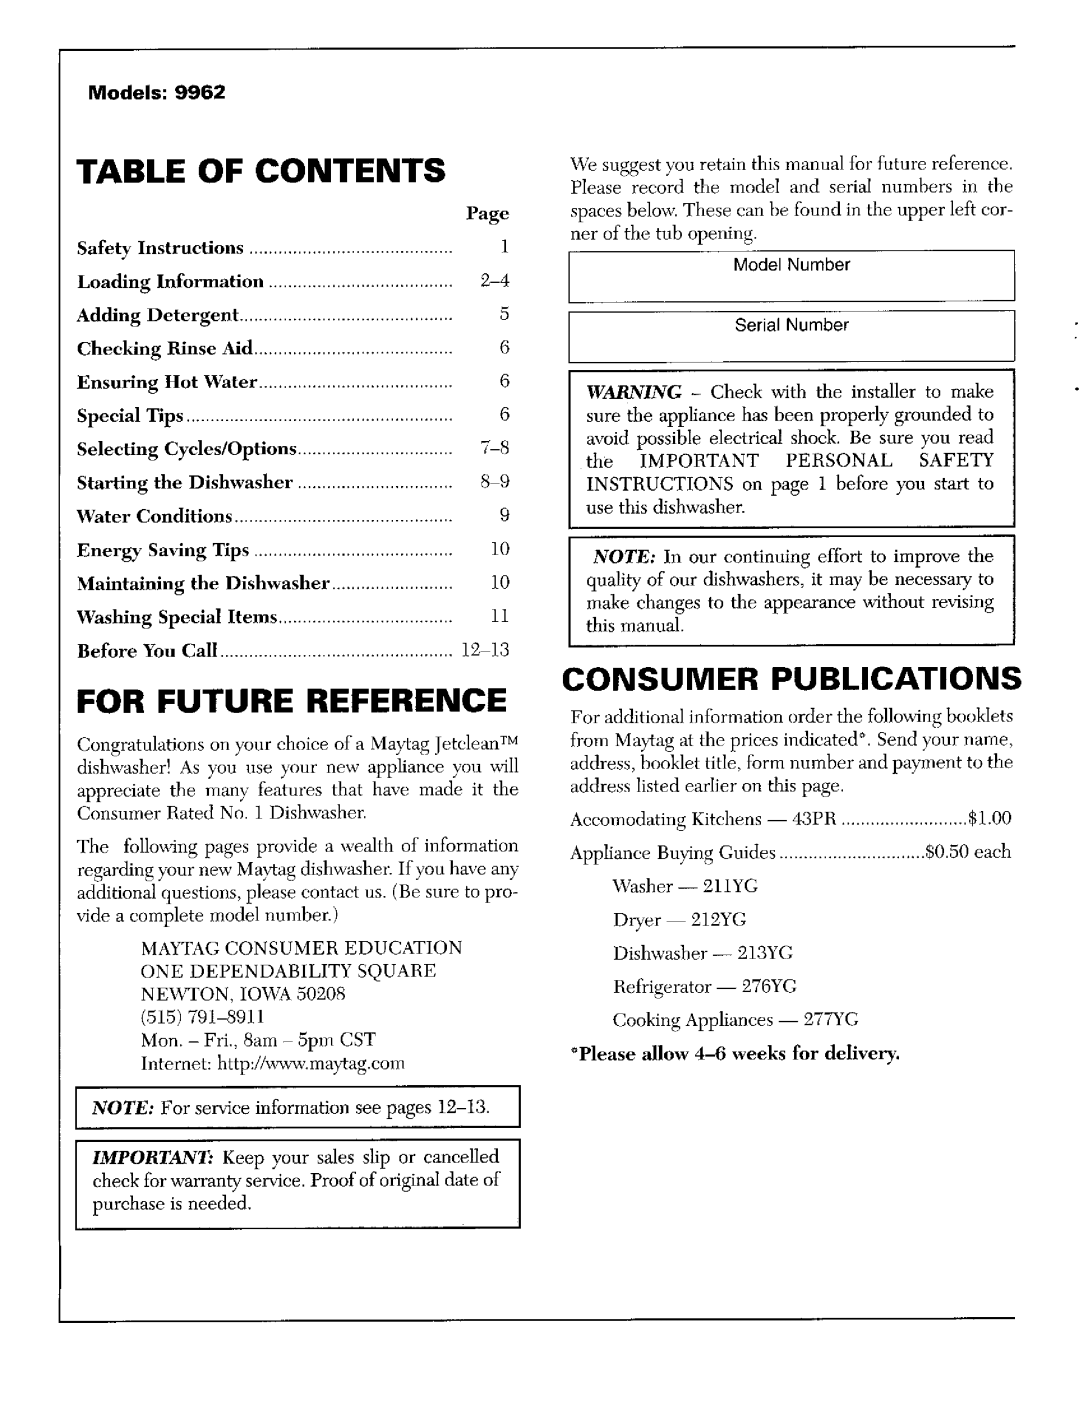 Maytag 9962 warranty For Future Reference, Consumer Publications, Models, Contents 